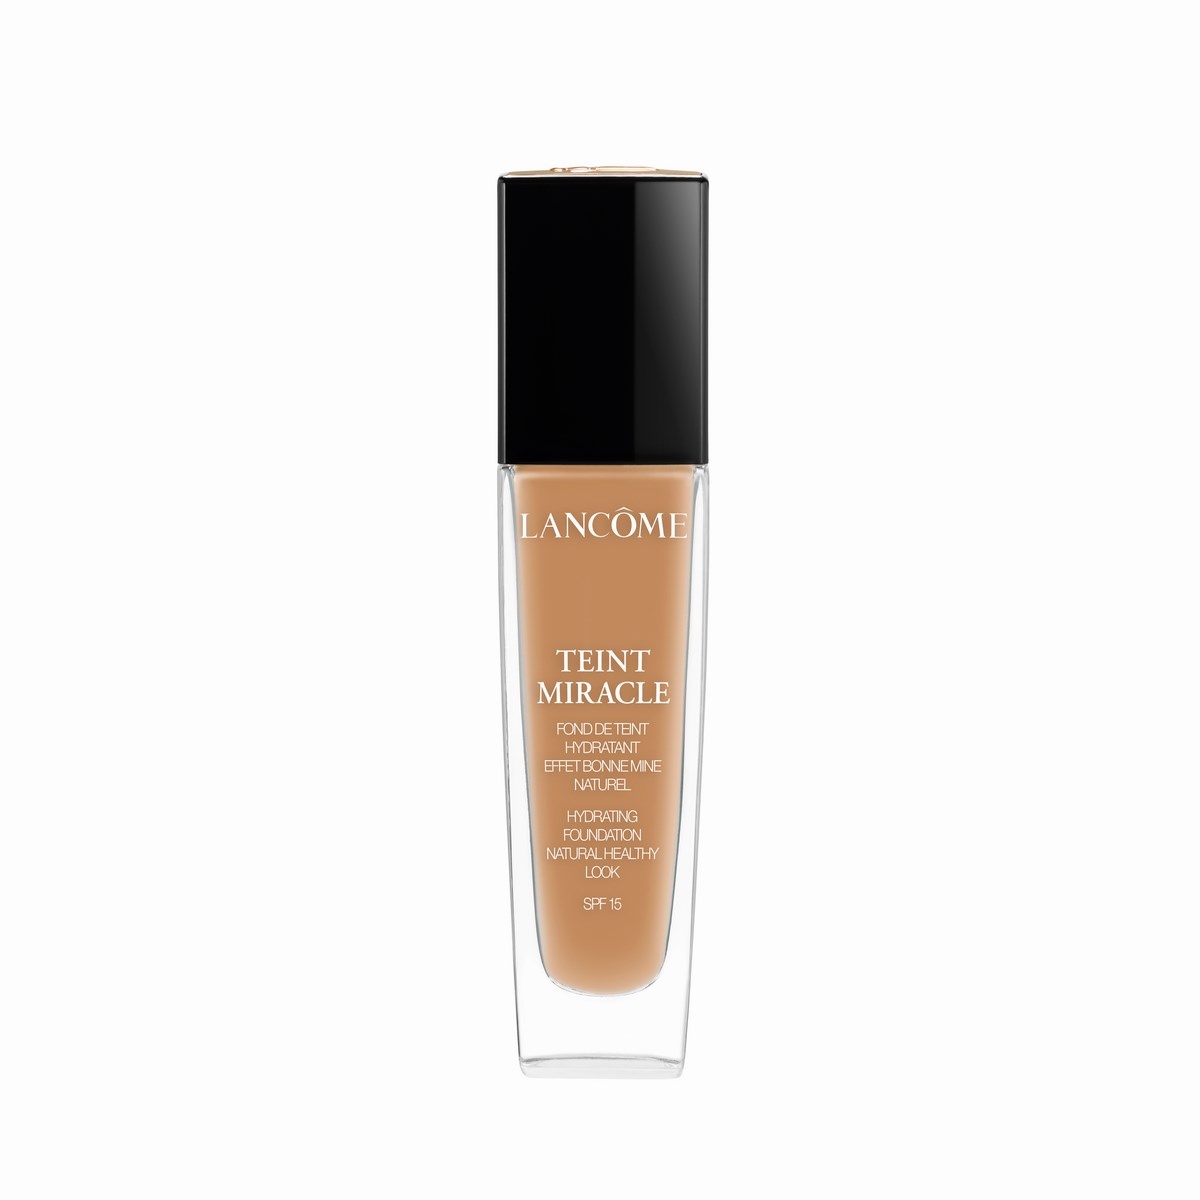  Teint Miracle Hydrating Foundation, 10 Praline